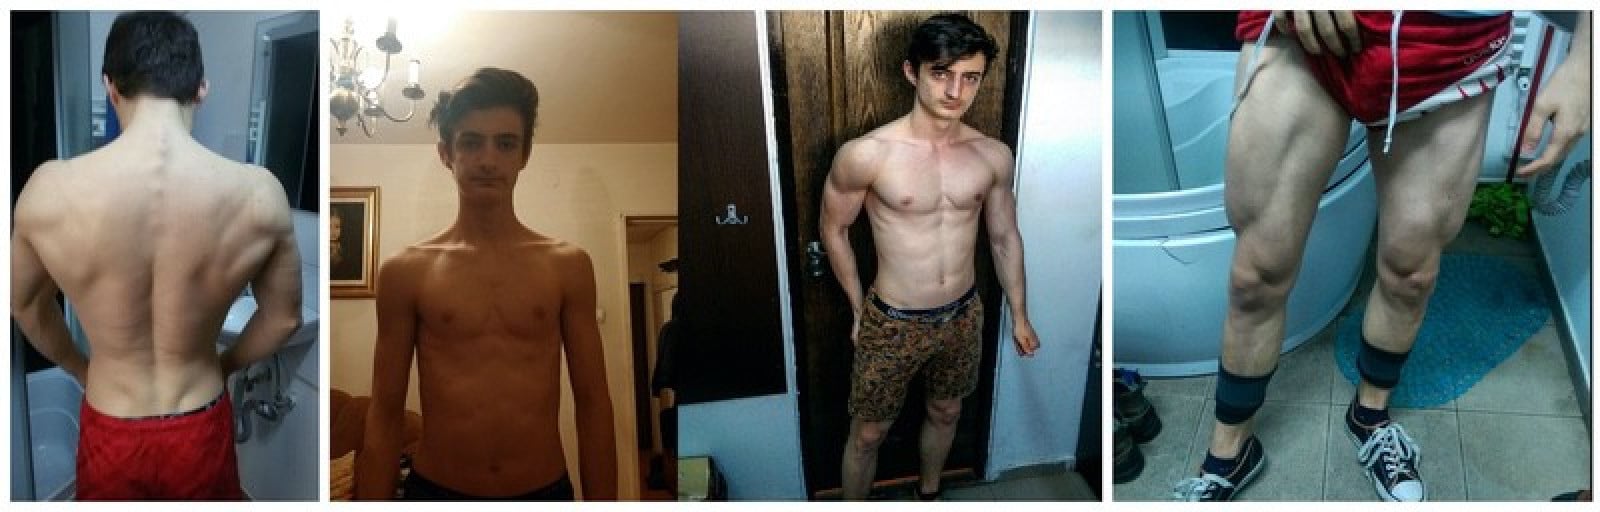 A progress pic of a 5'11" man showing a weight bulk from 115 pounds to 143 pounds. A net gain of 28 pounds.